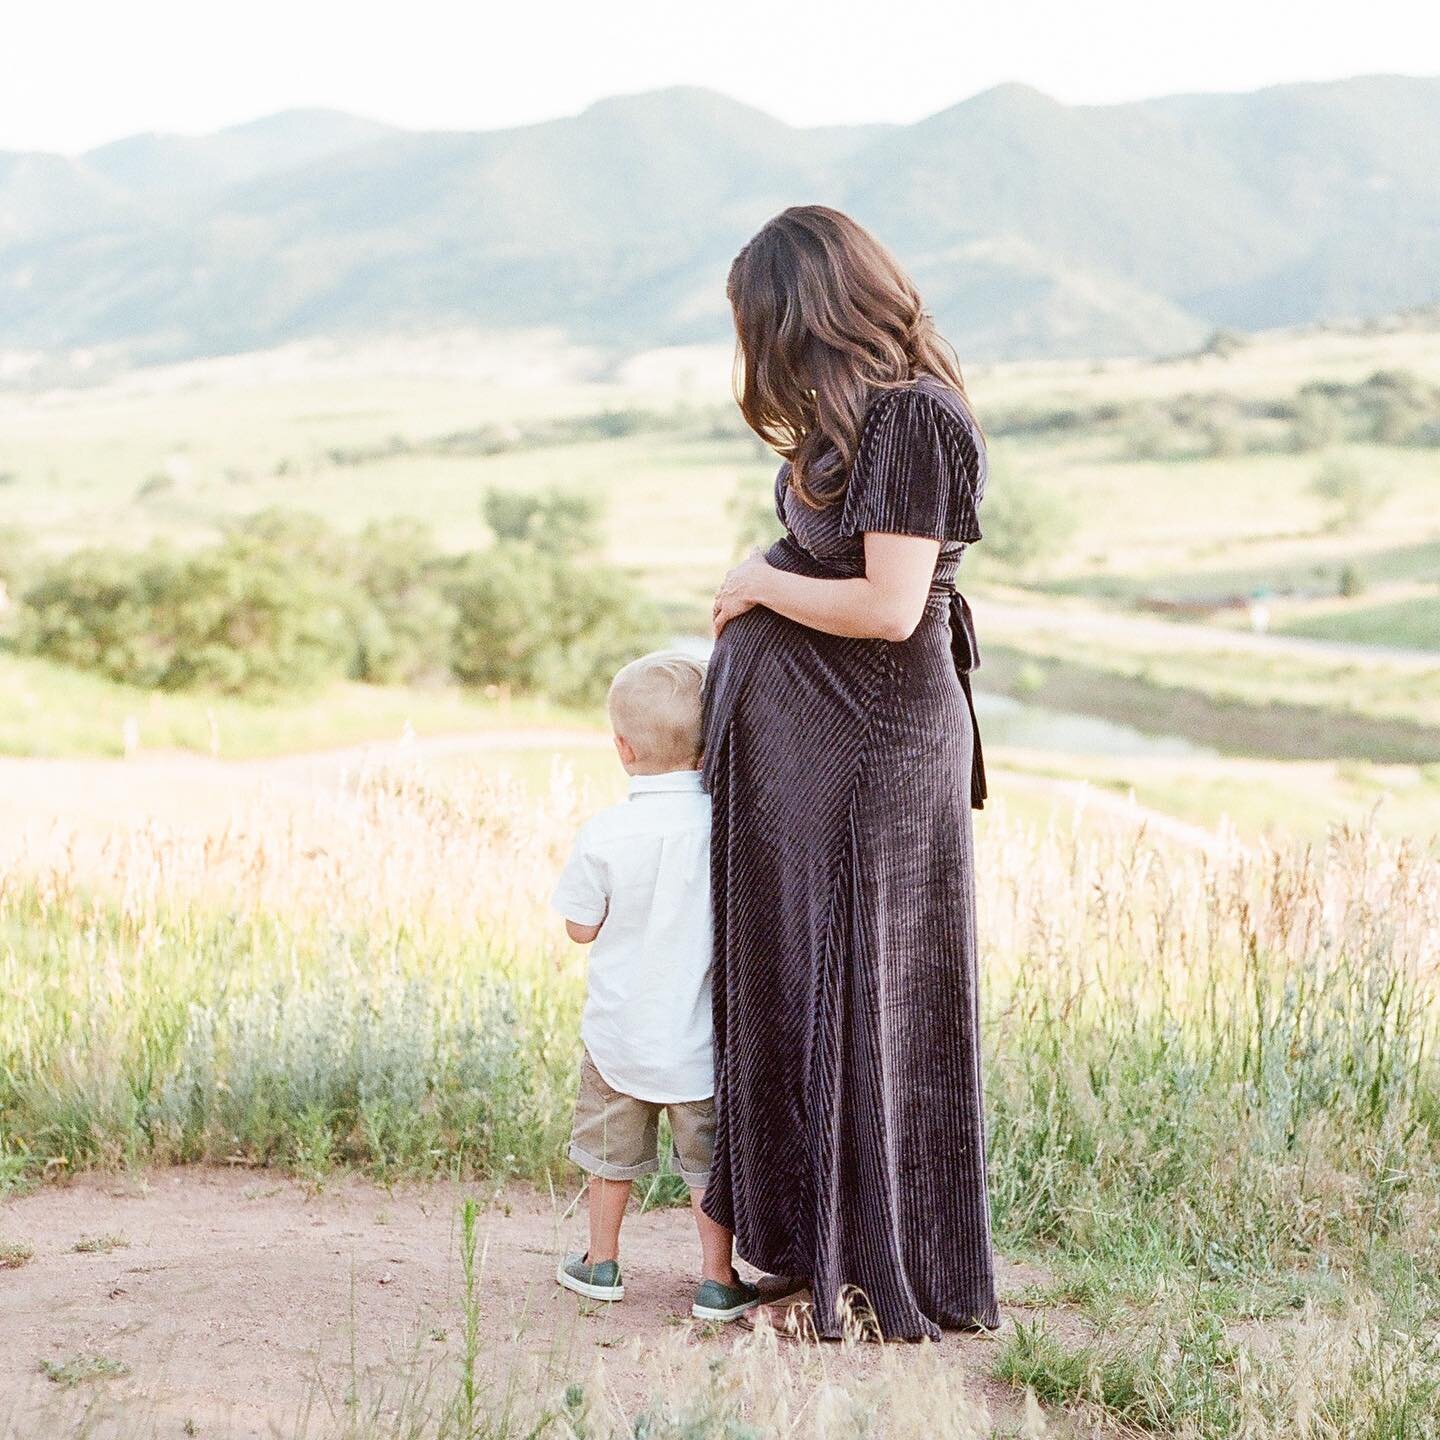 Dreamy, gorgeous mamas having beautiful babies . Film&hellip;you&rsquo;re stealing my heart. #denvermaternityphorographer